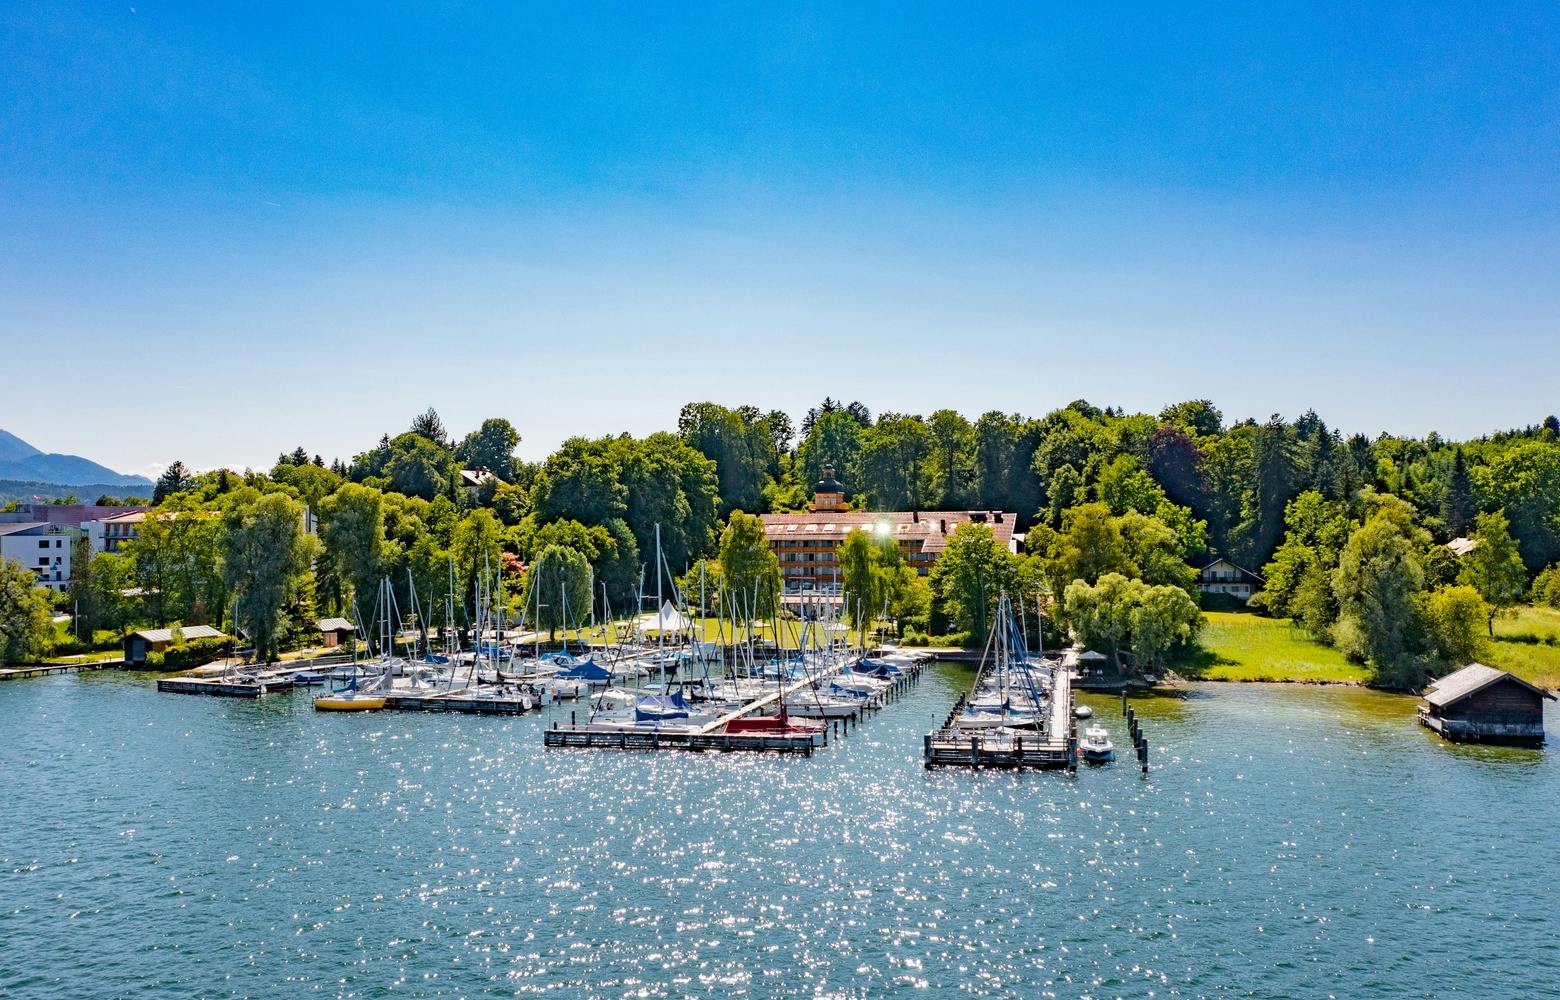 Luxurious yacht hotel directly next to Lake Chiemsee